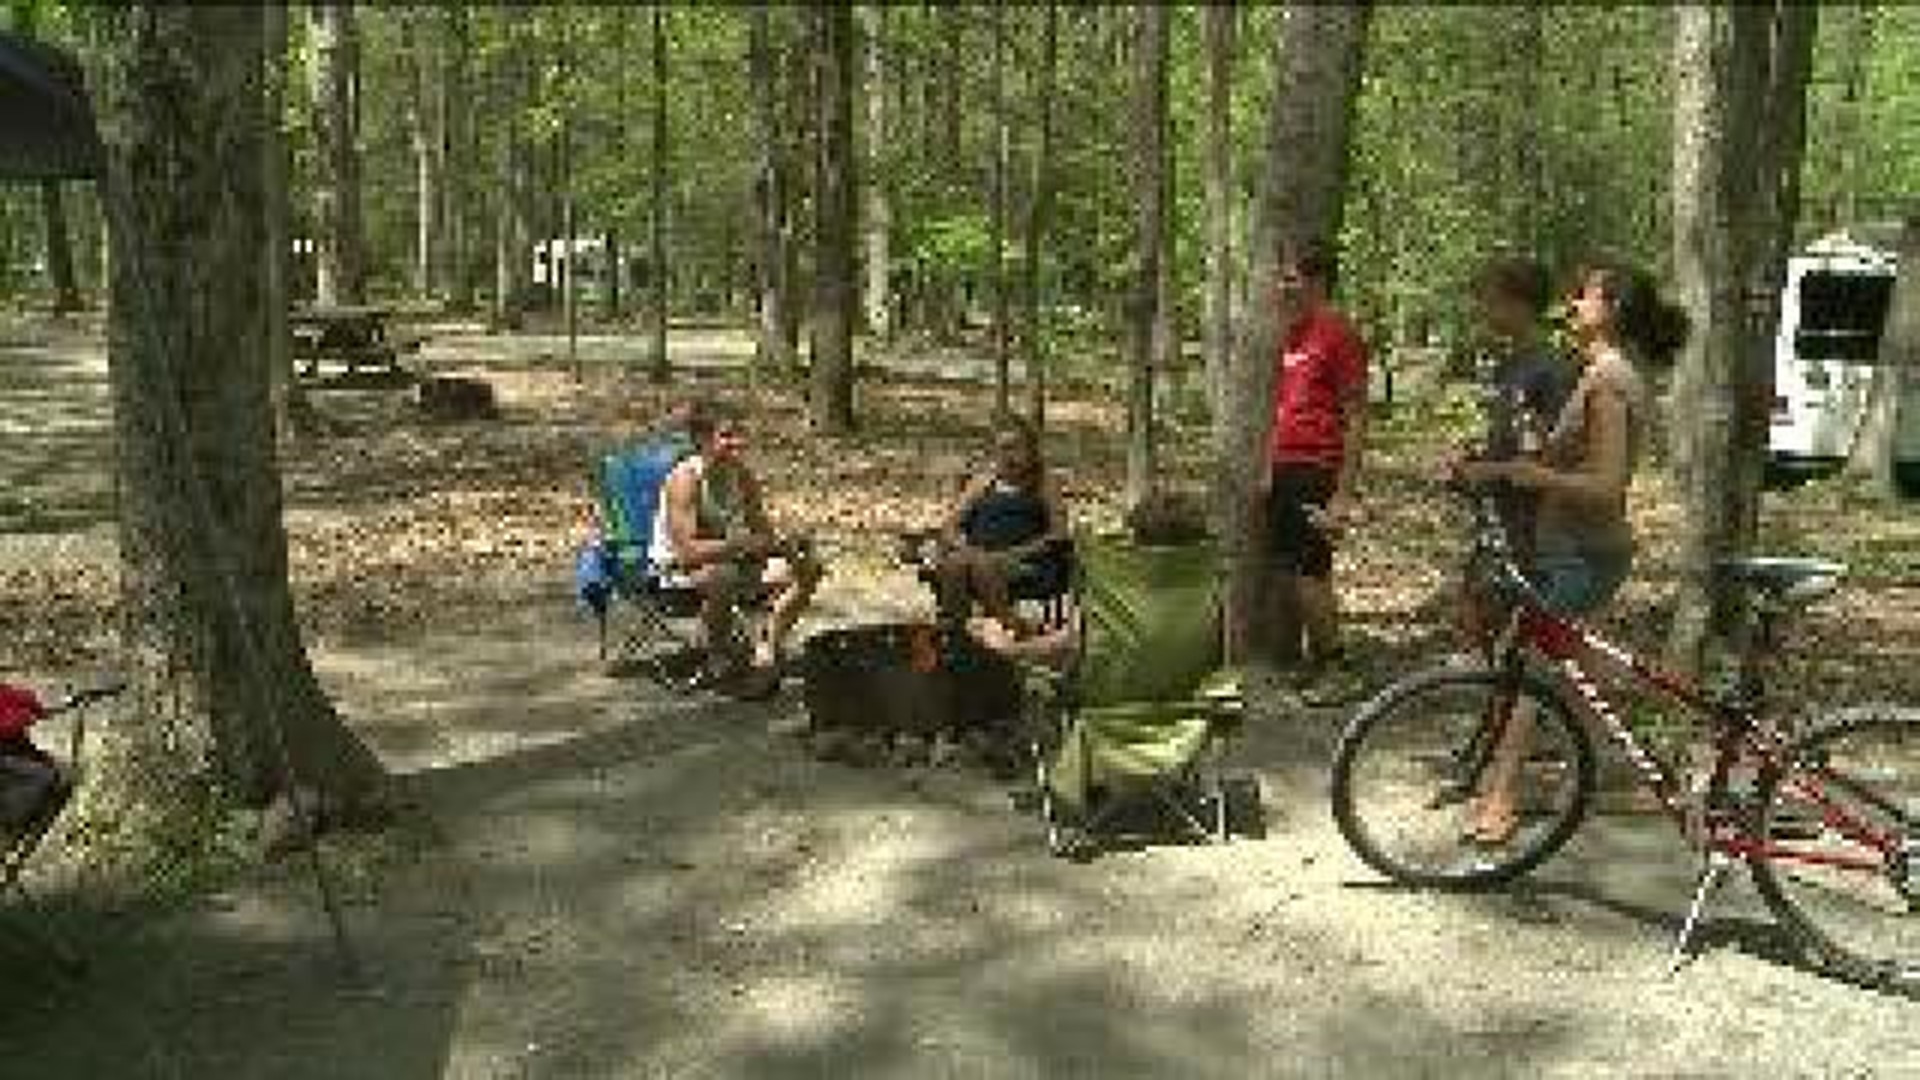 State Park at Full Capacity for Holiday Weekend